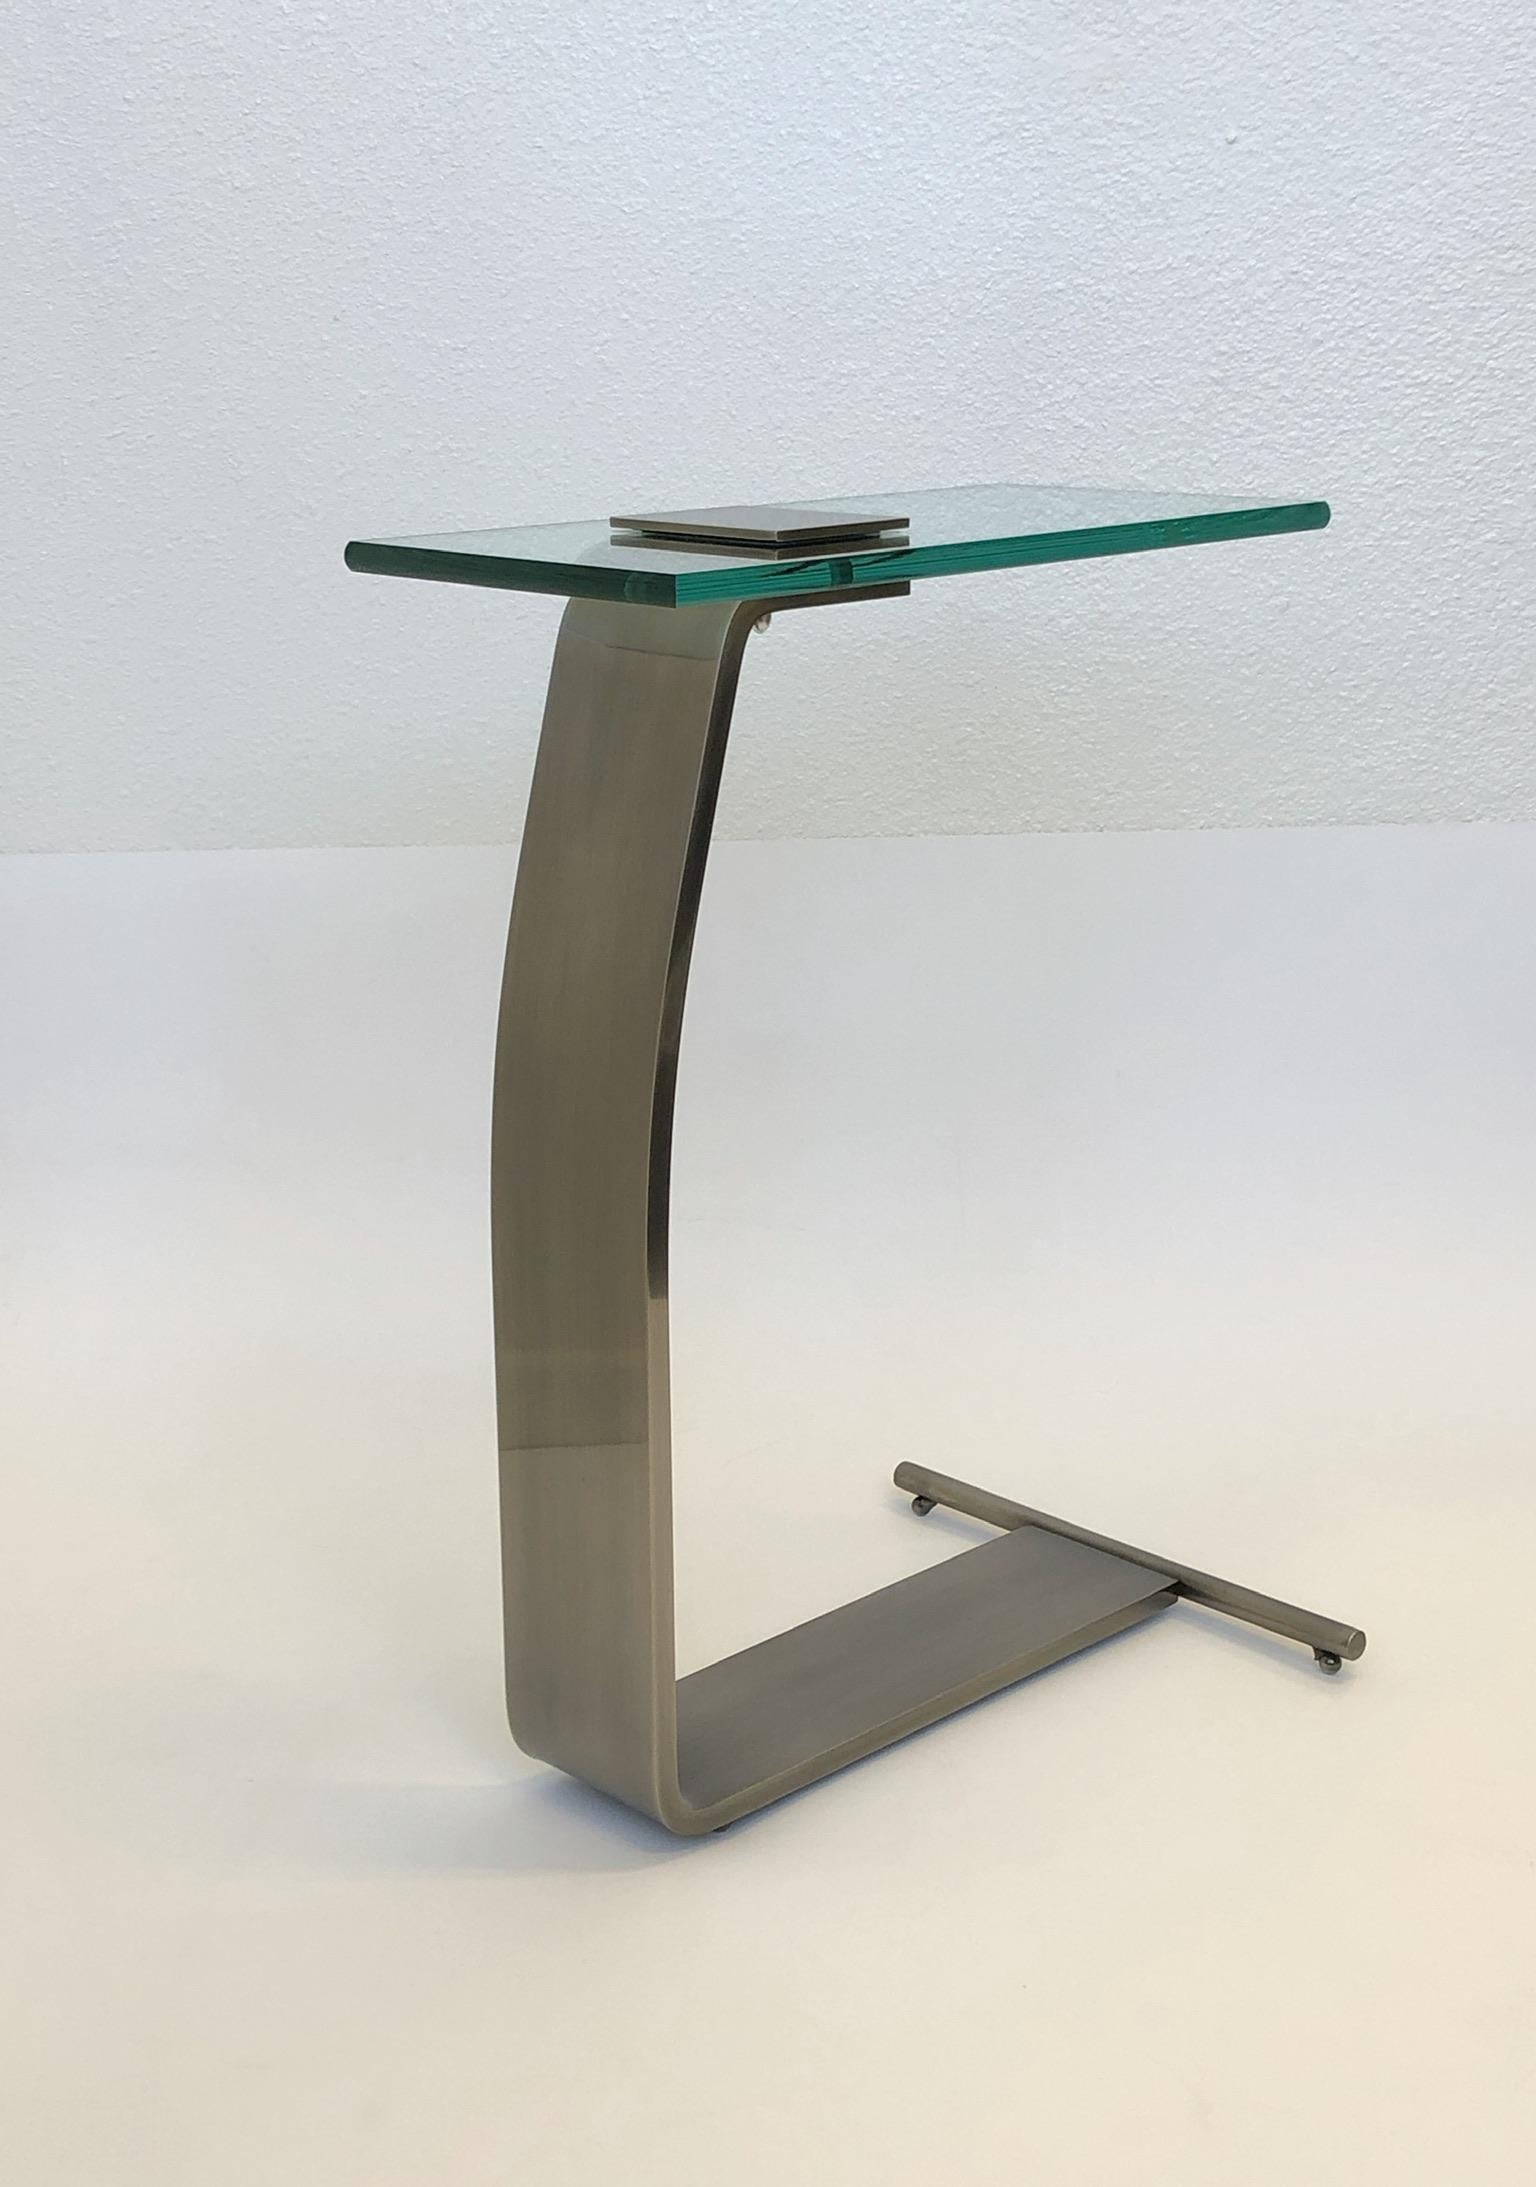 American Stainless Steel and Glass Occasional Table by Design Institute of America